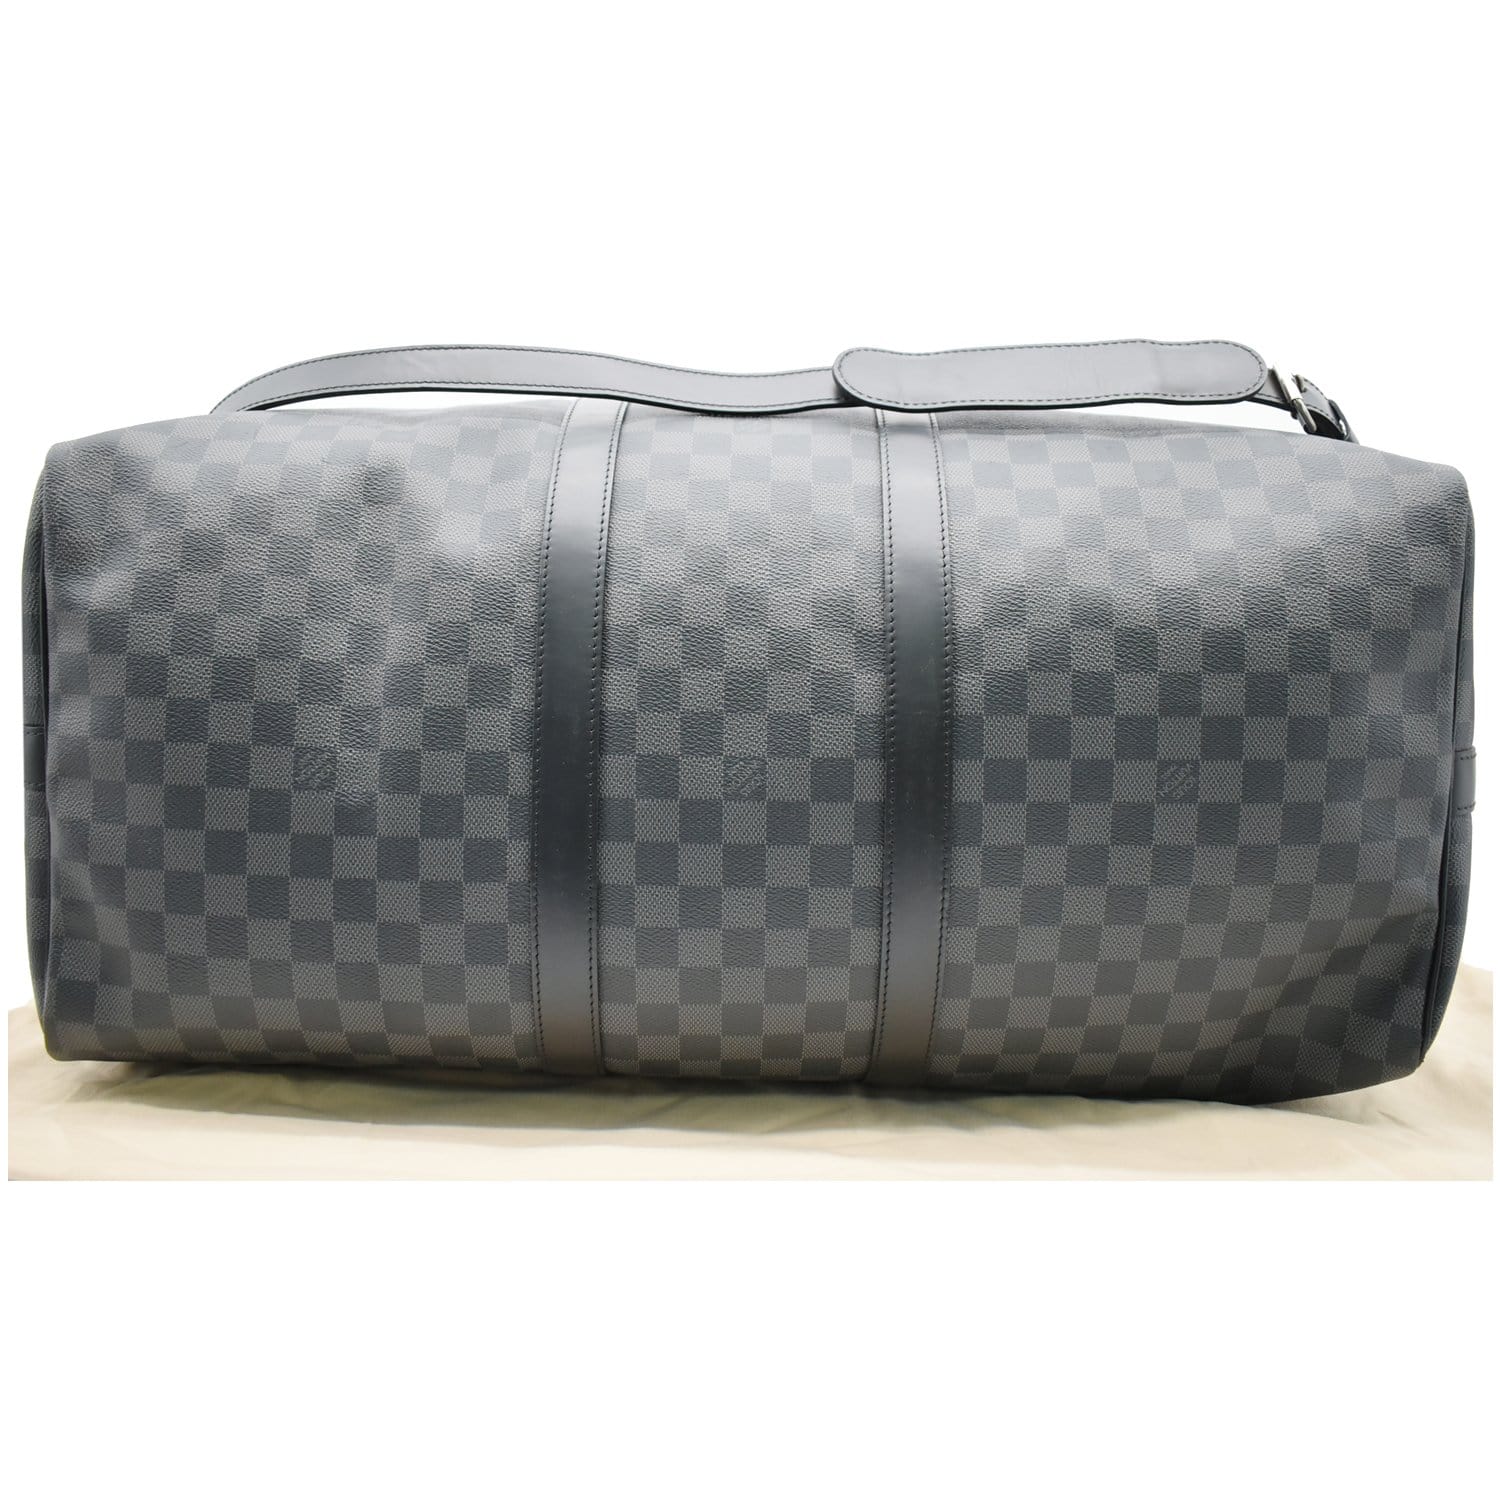 Pre-owned Louis Vuitton Bandouliere 55 Keepall Damier Graphite